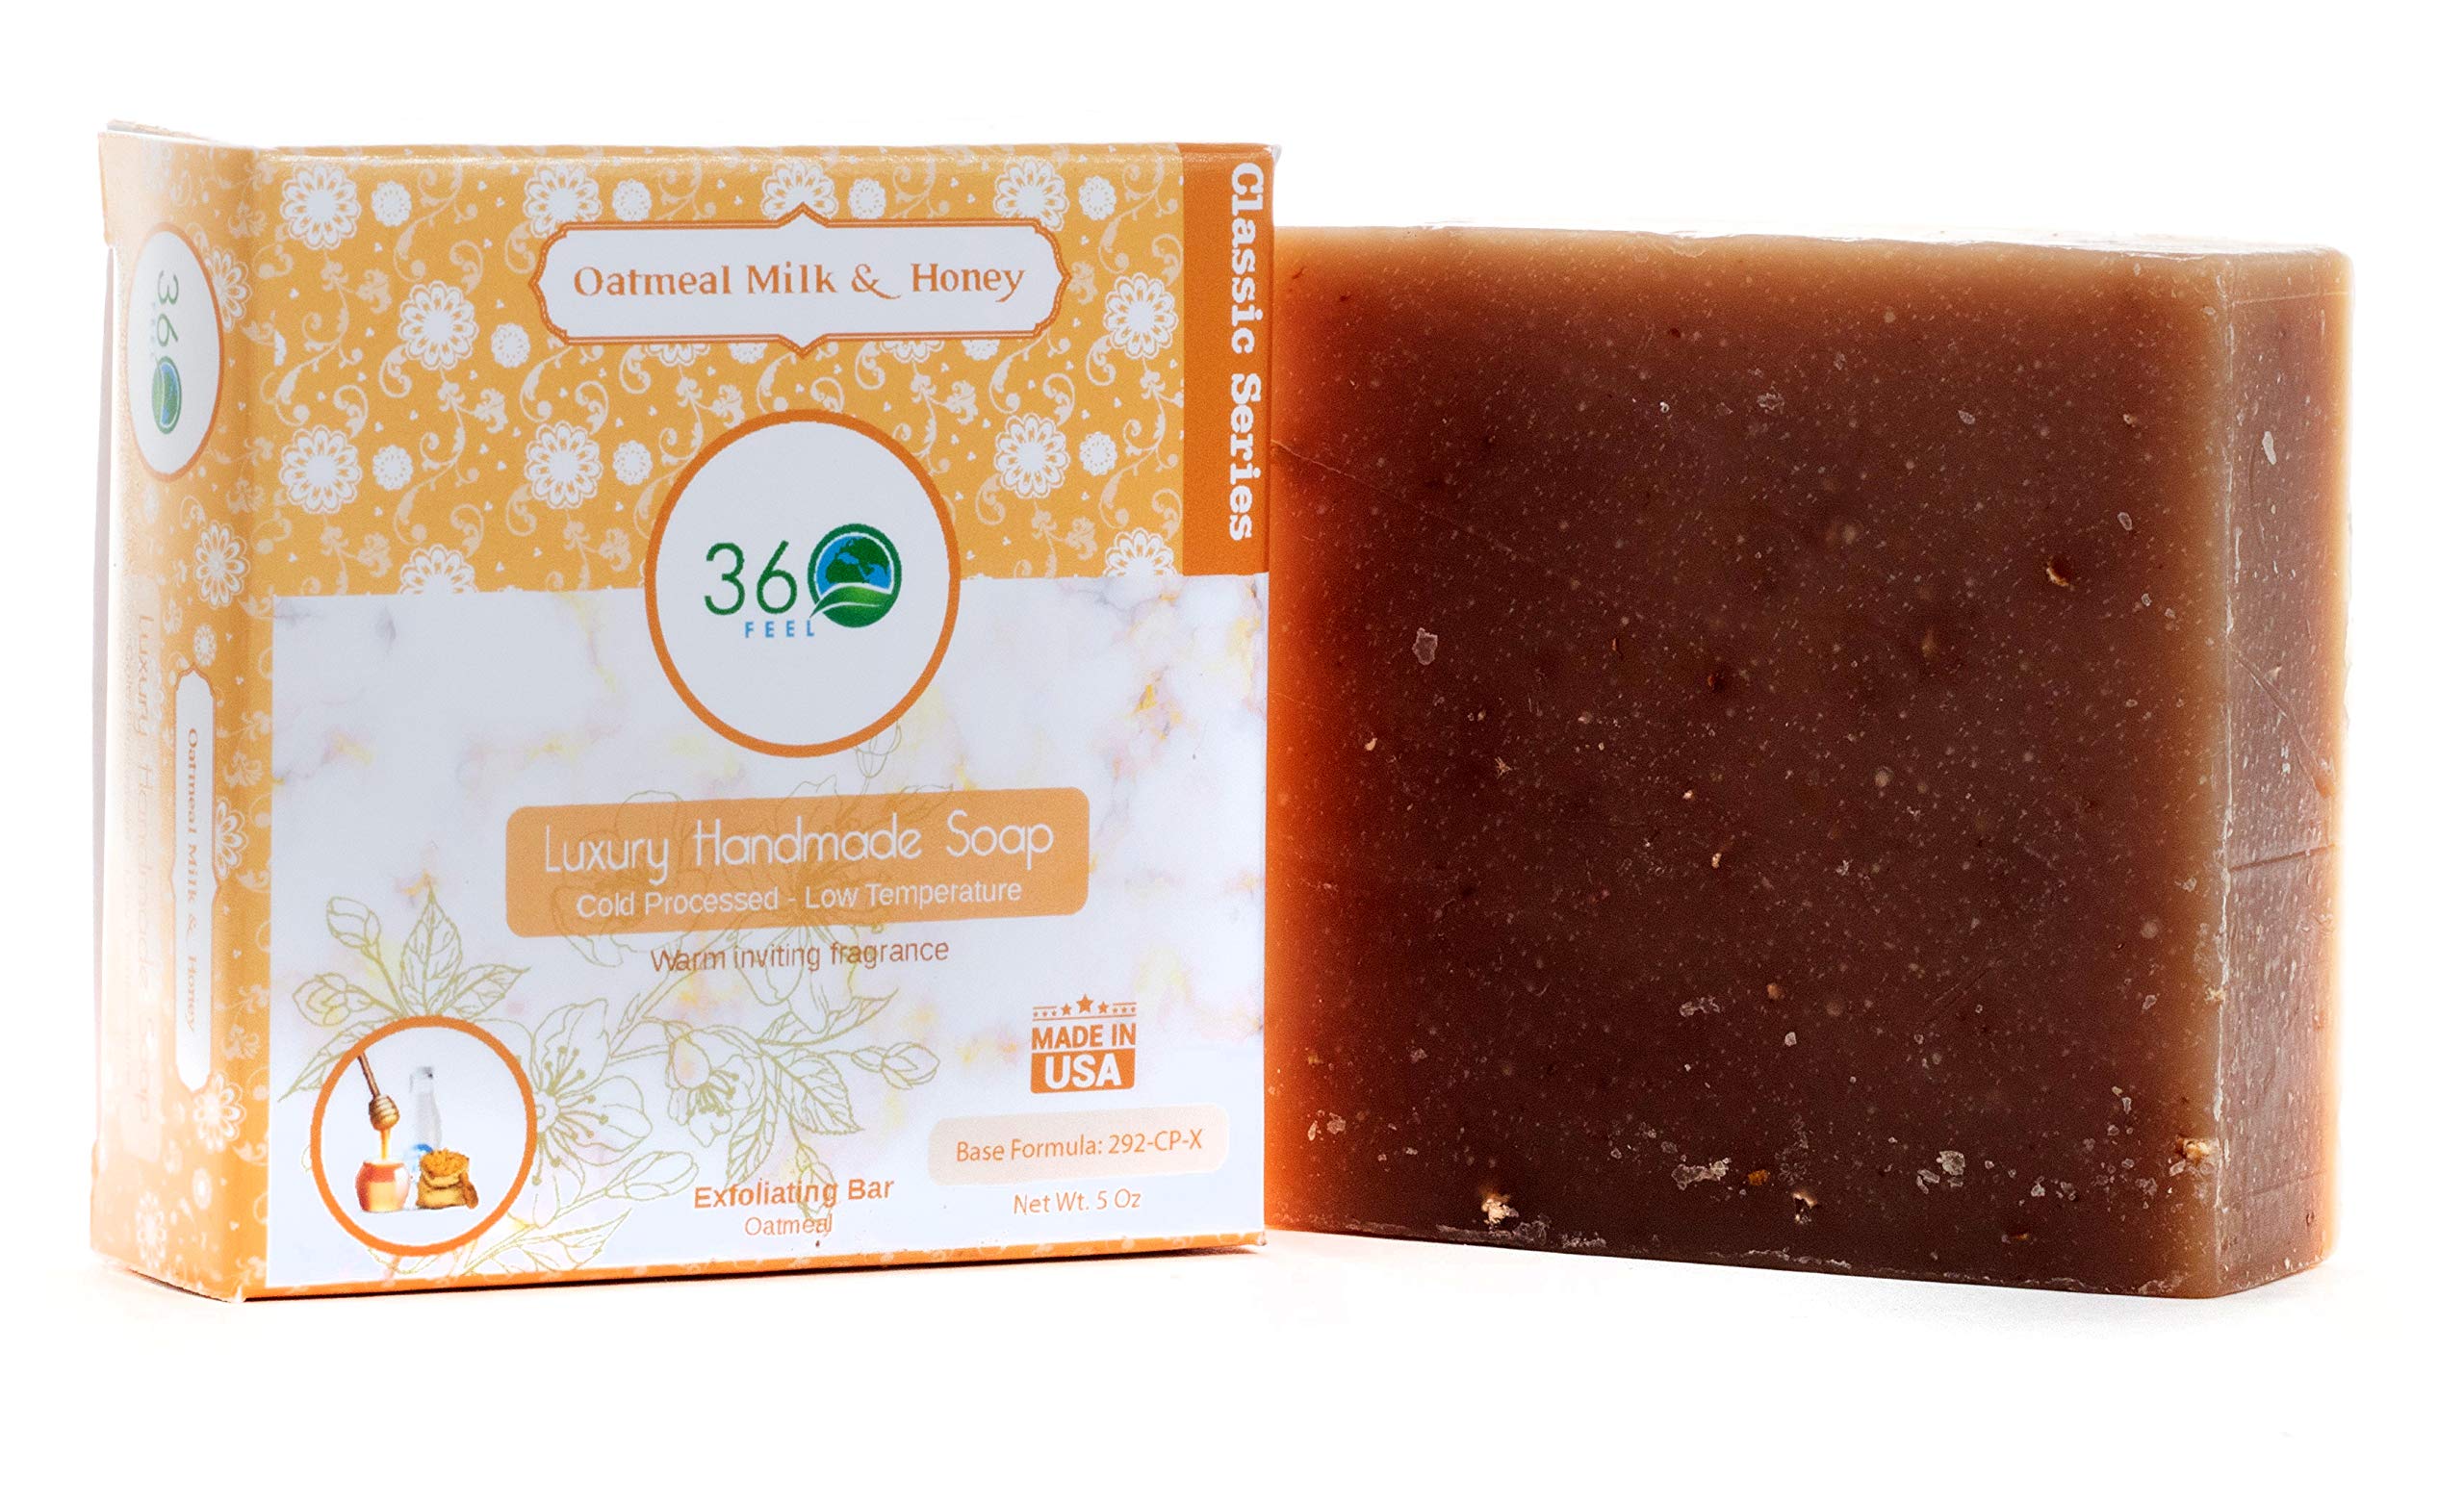 360Feel Oatmeal Milk & Castile Handmade Soap Bar - Warm inviting fragrance - exfoliant - Essential Oil Natural Soaps- Great as Anniversary Wedding Gifts Christmas stocking stuffer Honey, Brown, 5 Oz